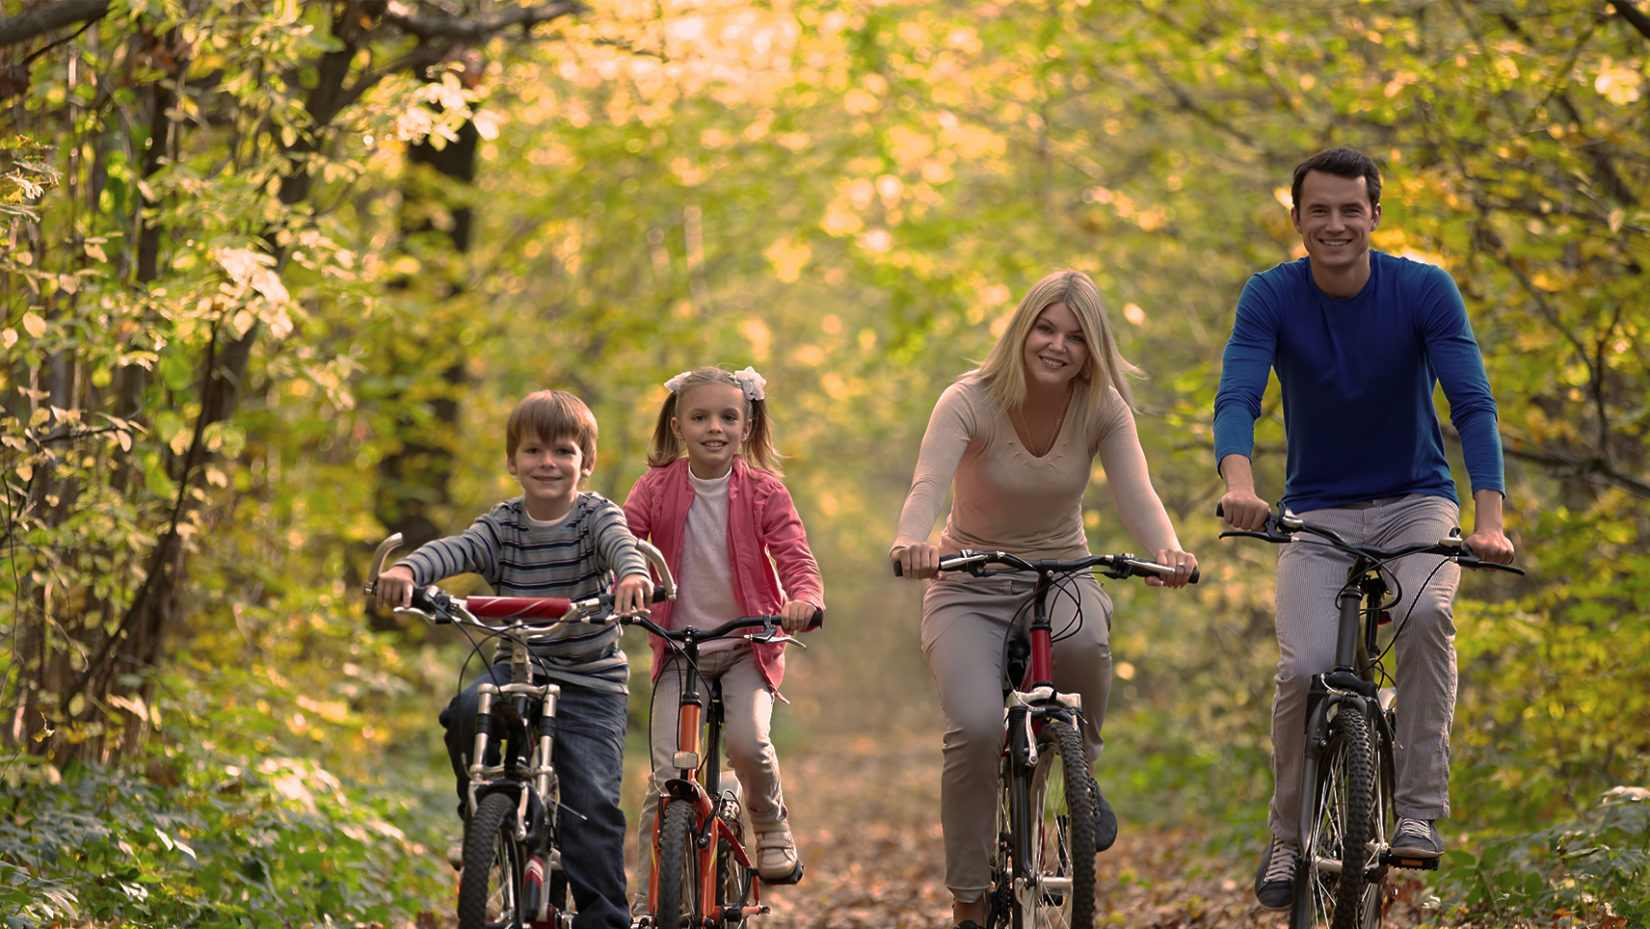 smiling family riding bikes in a park during autumn